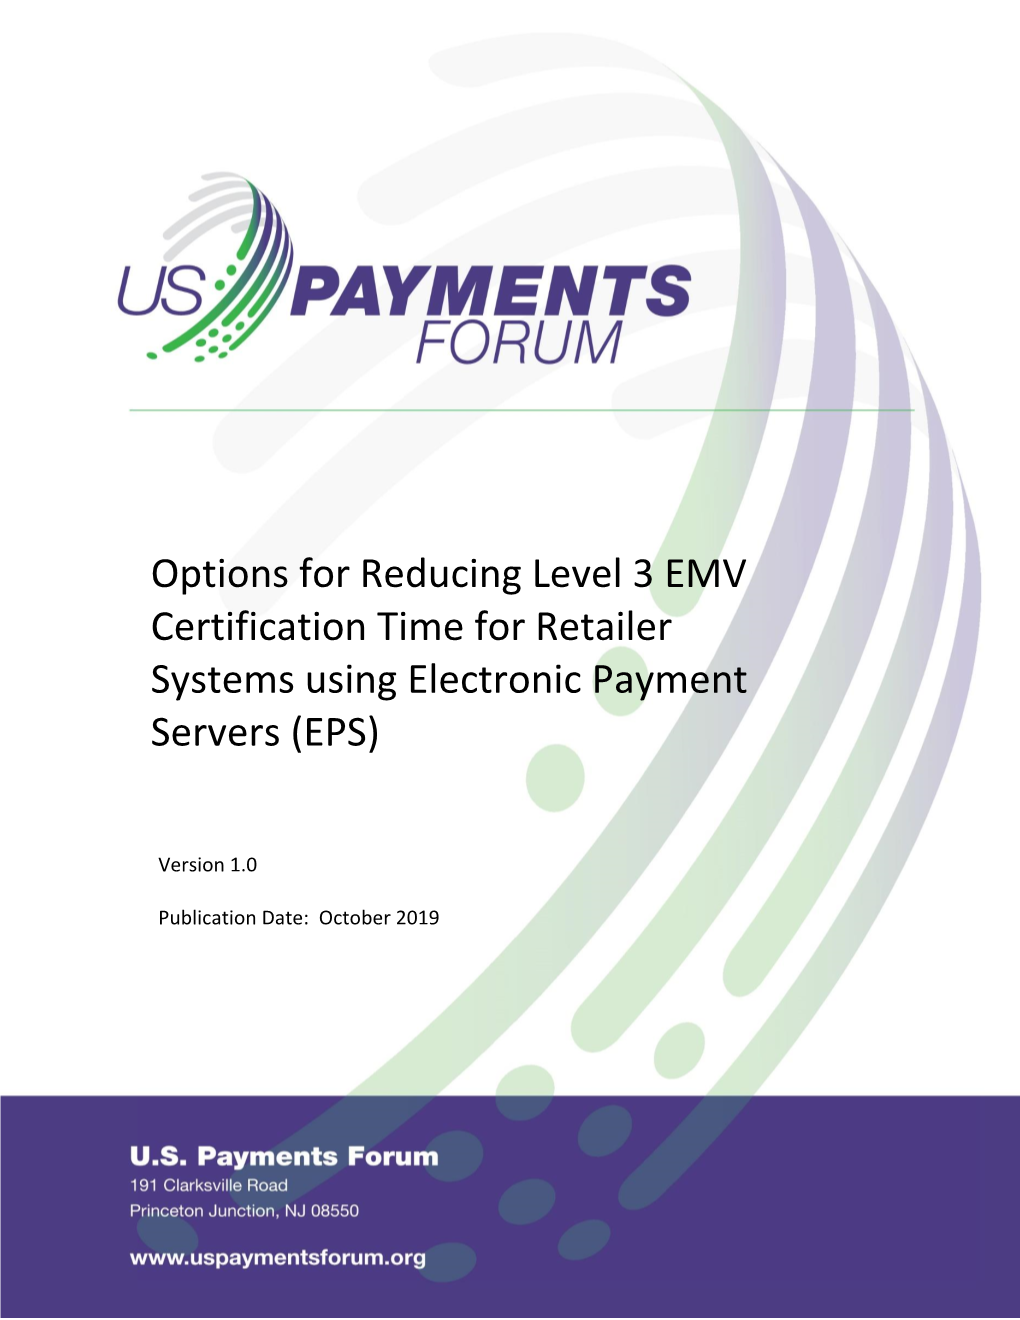 Options for Reducing Level 3 EMV Certification Time for Retailer Systems Using Electronic Payment Servers (EPS)